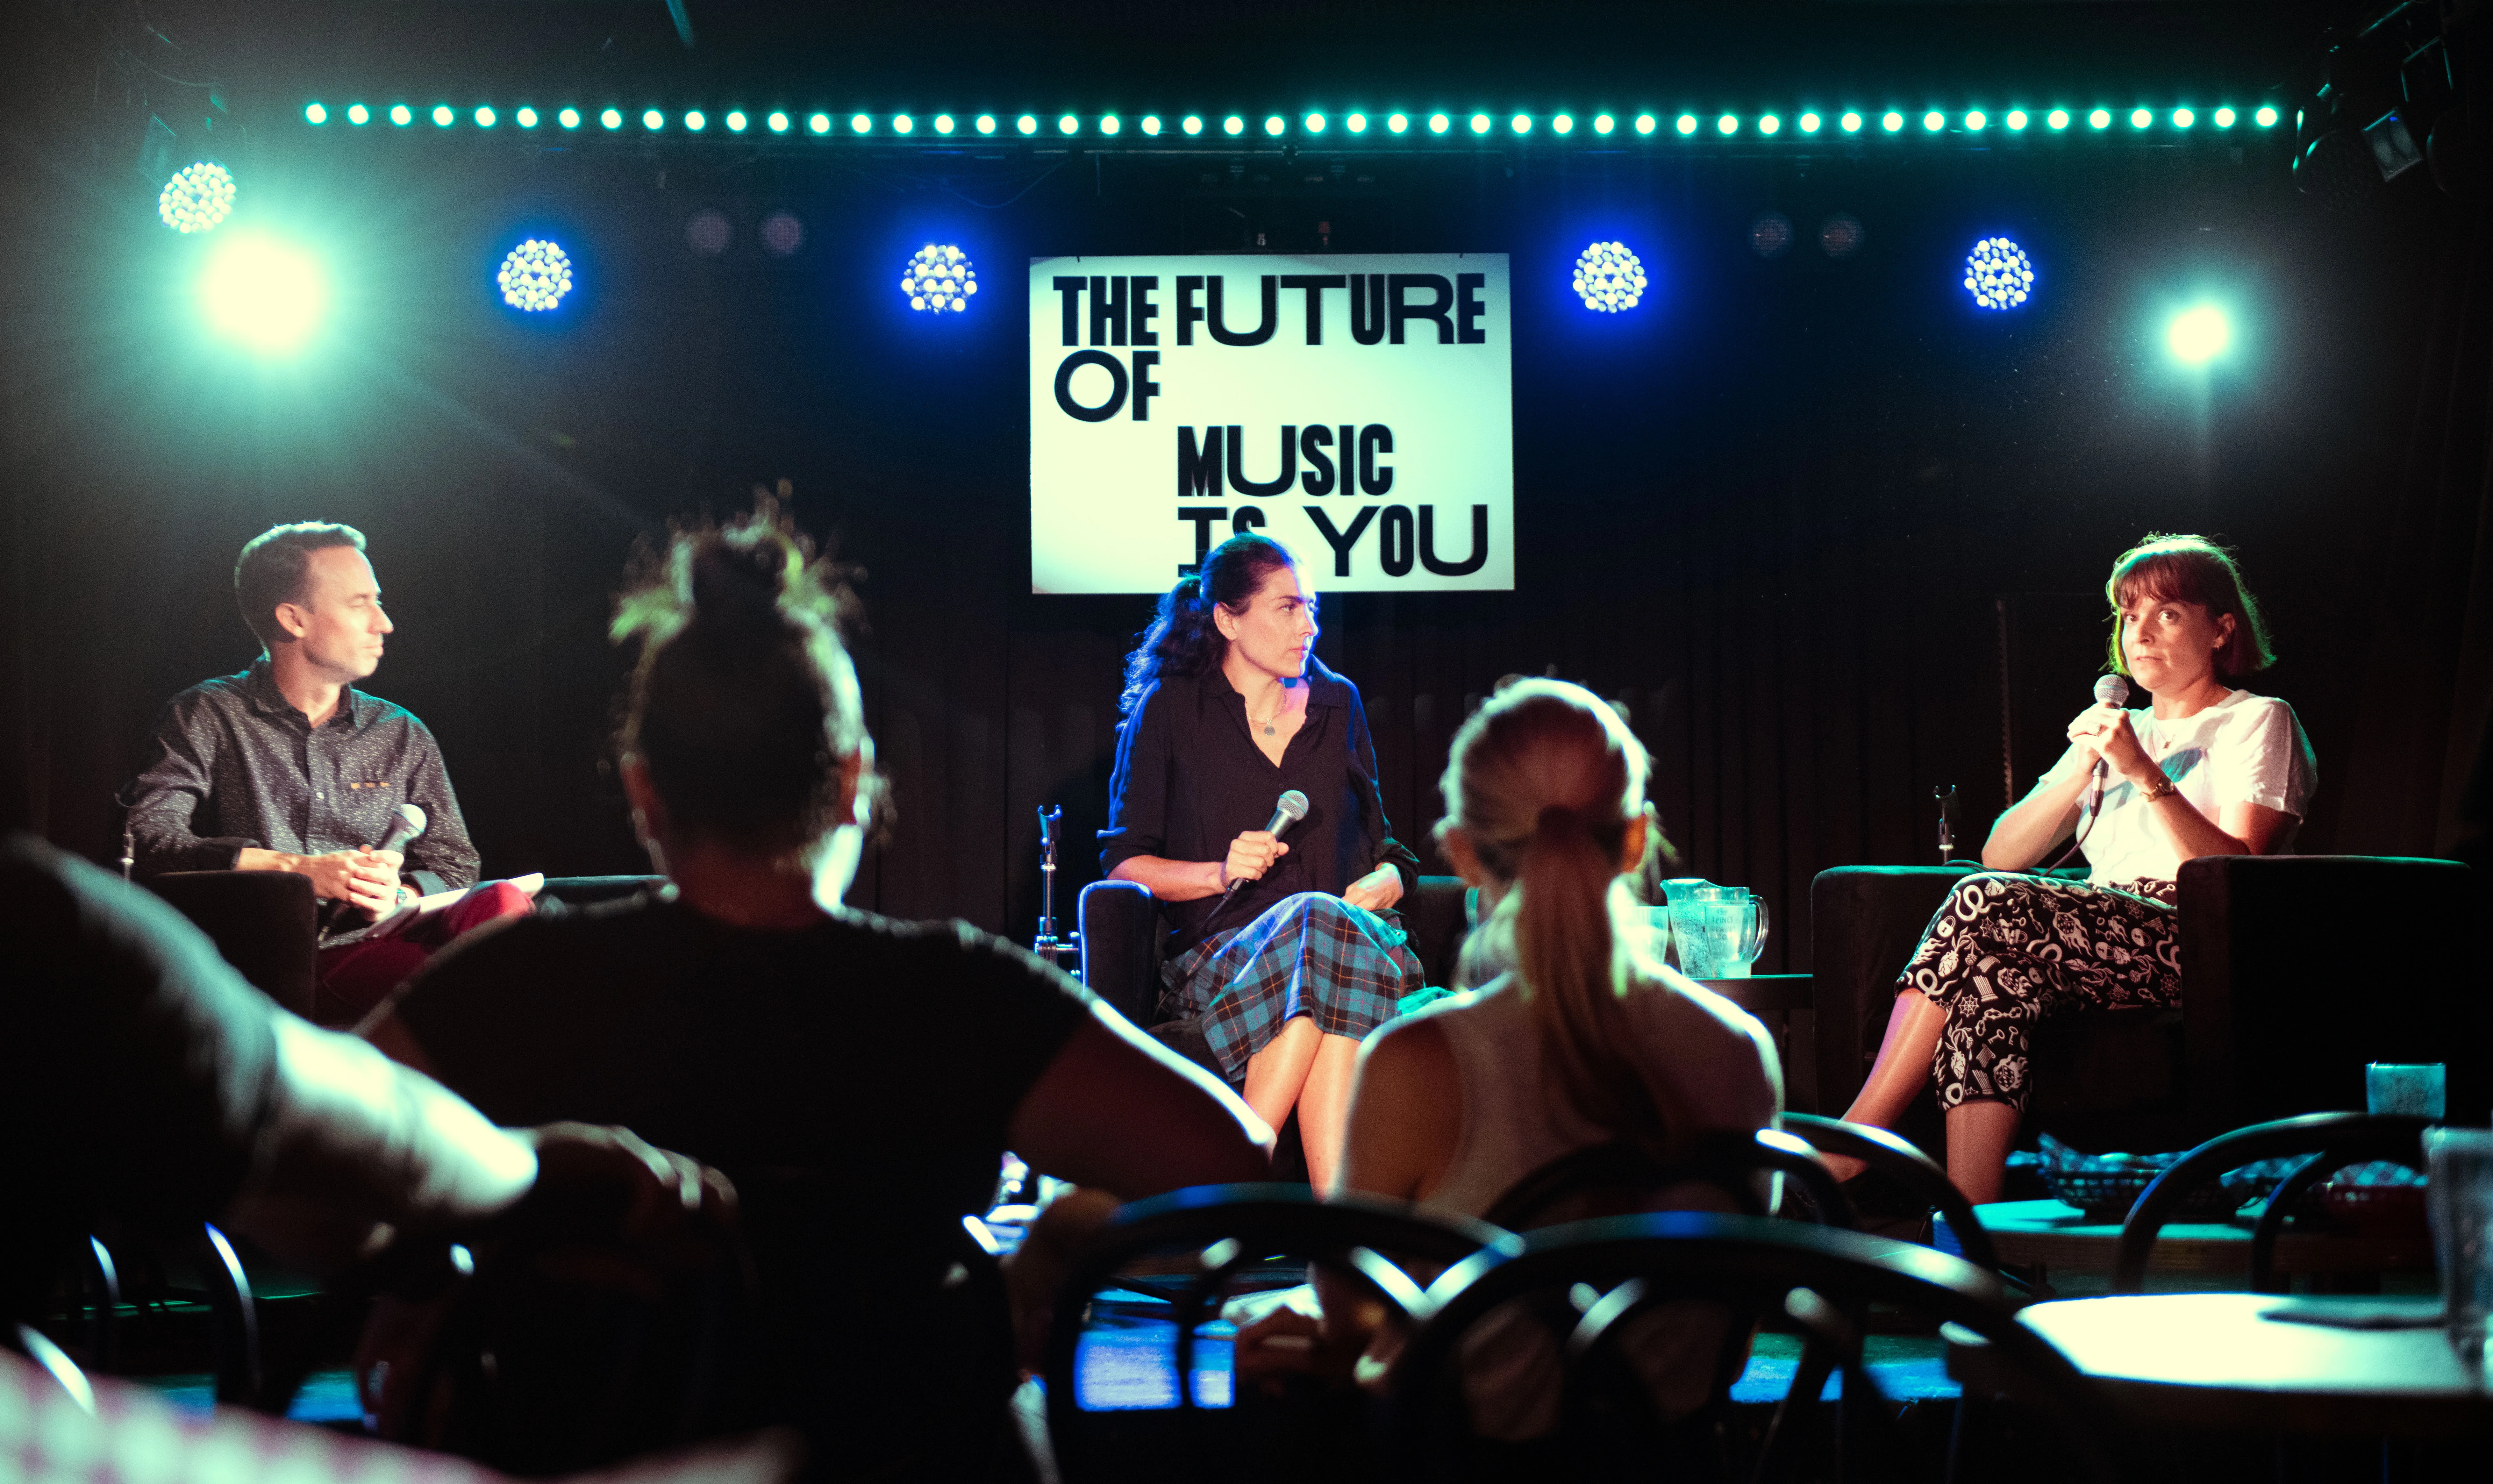 Music Masterclass in Sydney. SAE sponsored featuring DJ and producer Anna Lunoe